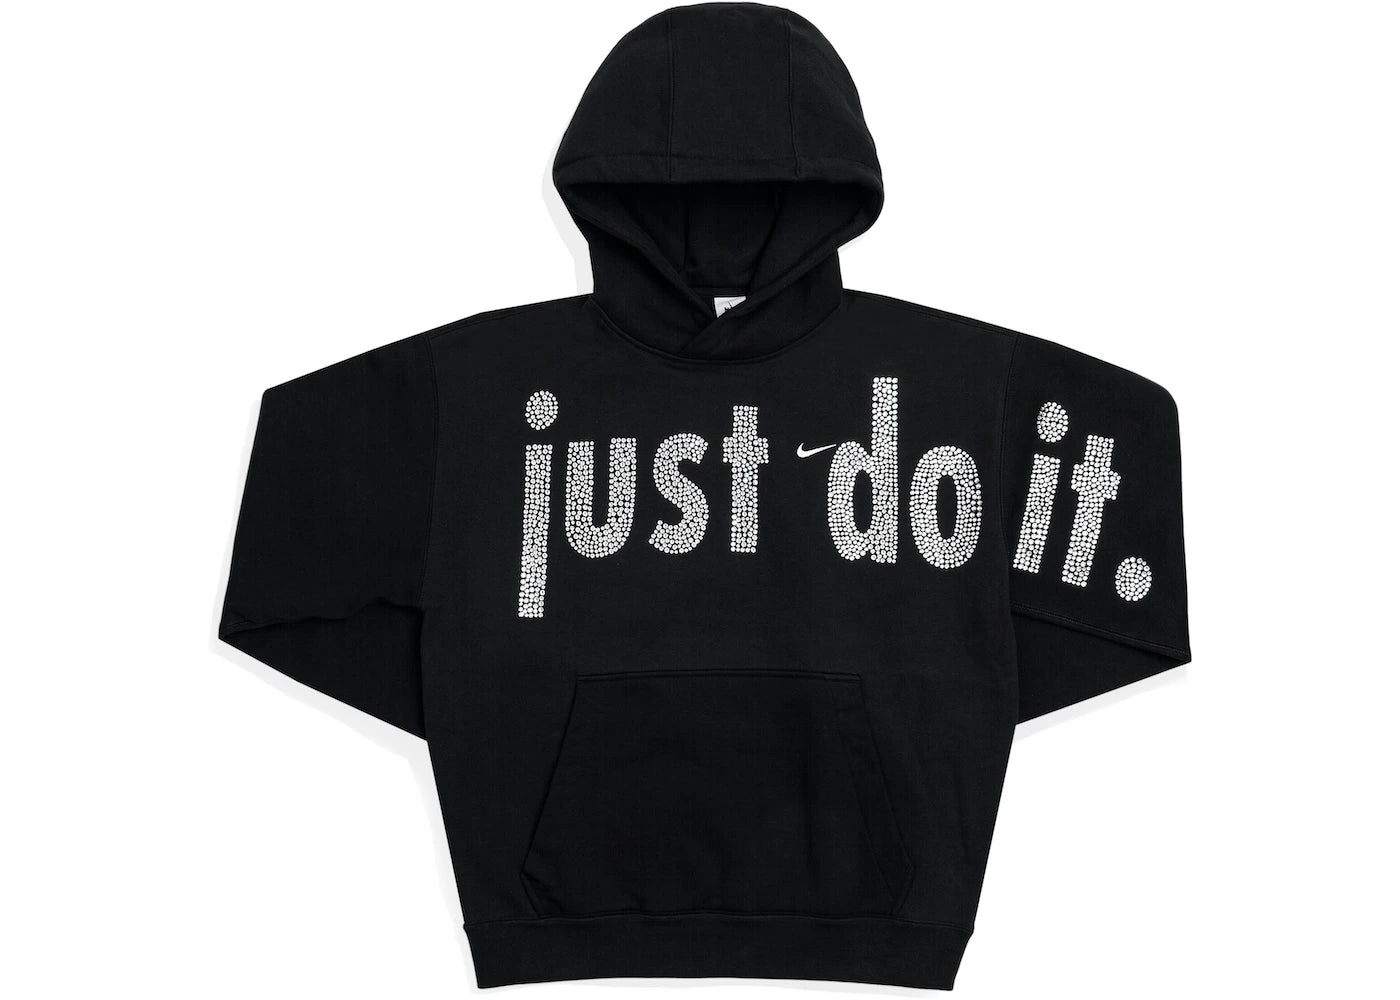 Stylish And Sparkling: The Just Do It Rhinestone Hoodie